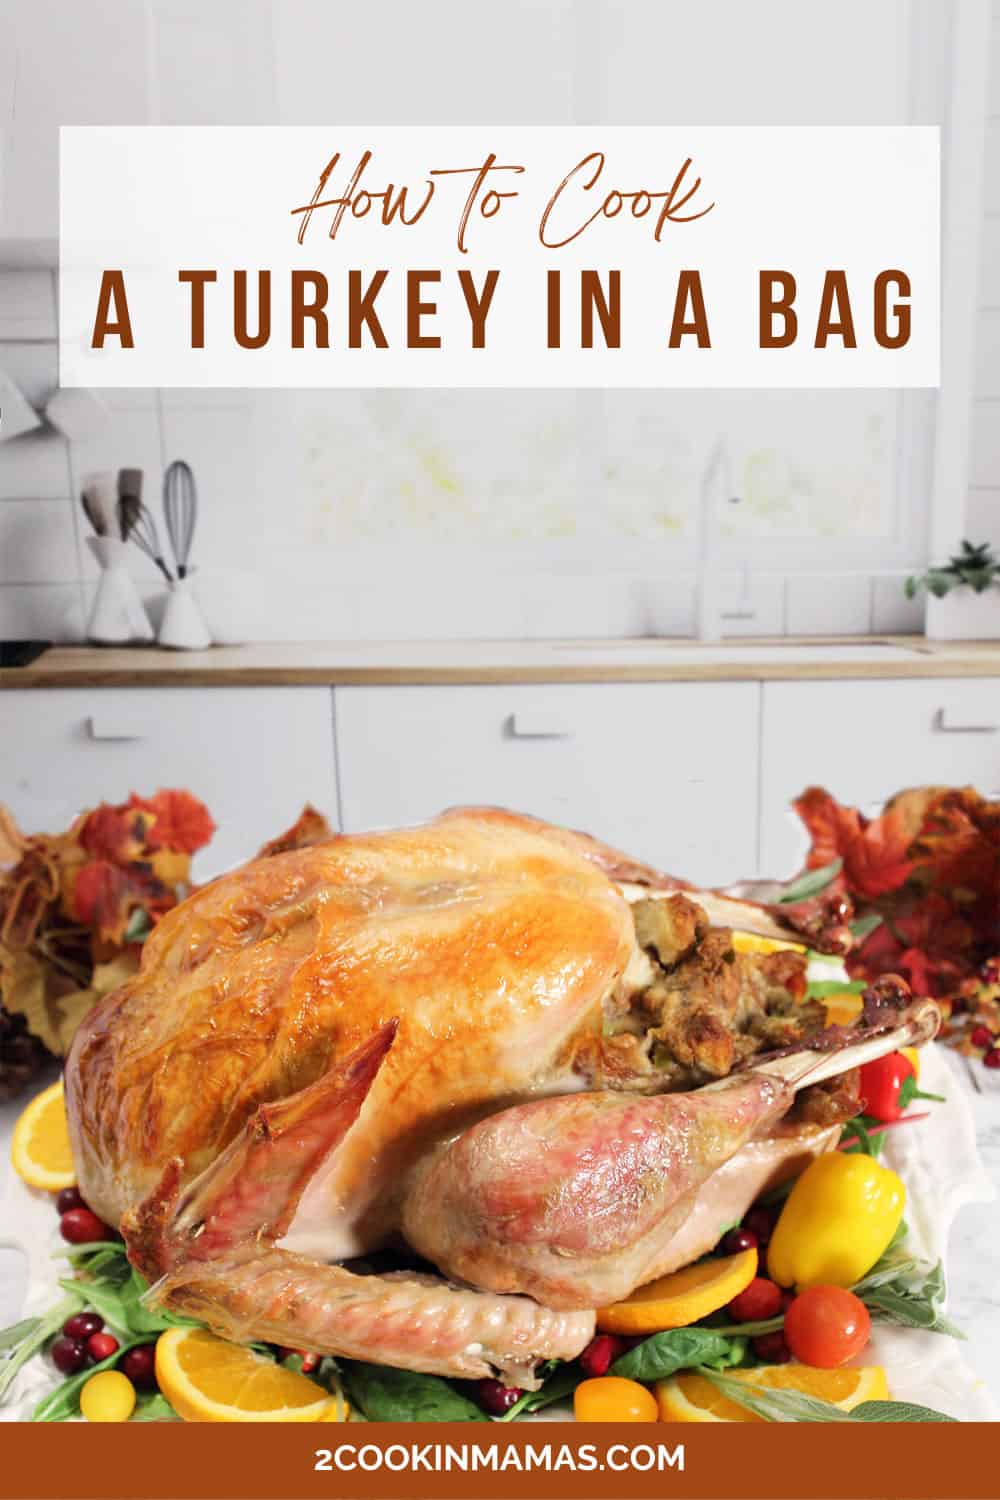 How to Cook a Turkey in a Bag